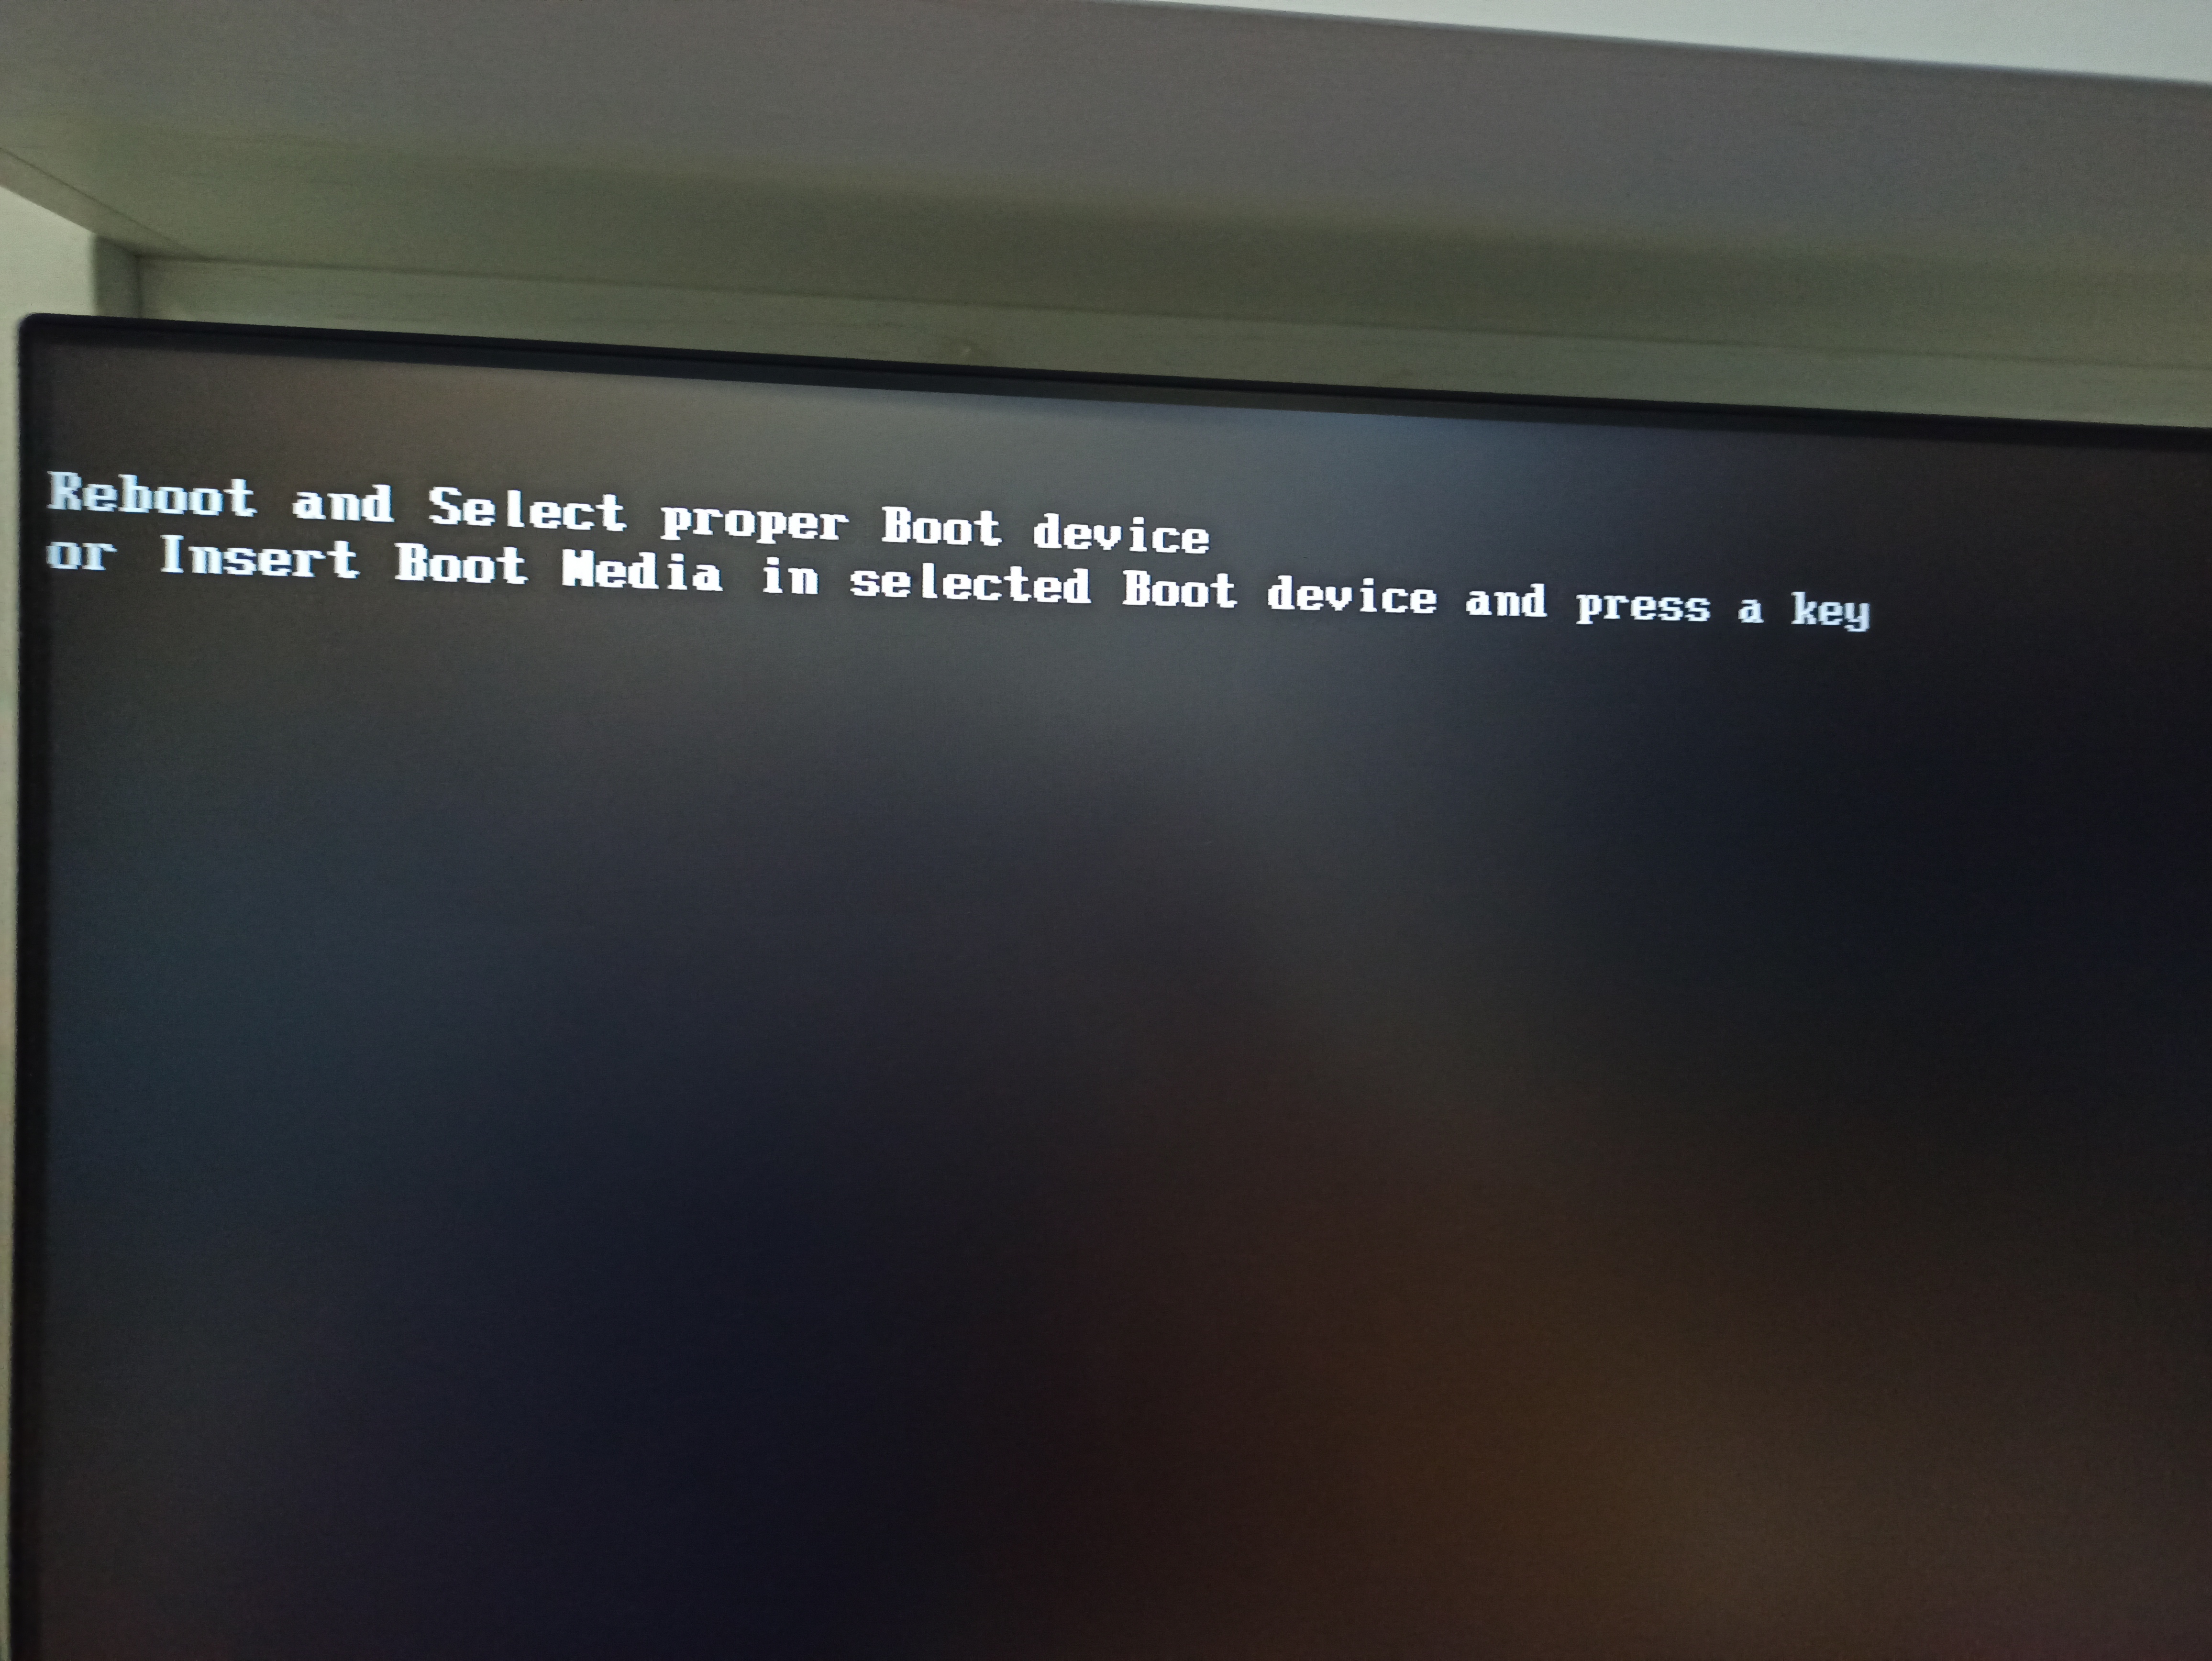 Reboot and select proper Boot device Acer моноблок. Ошибка Reboot and select proper Boot device. Компьютер Reboot and select proper Boot device. Reboot and select proper Boot. Ошибка boot and select proper boot device